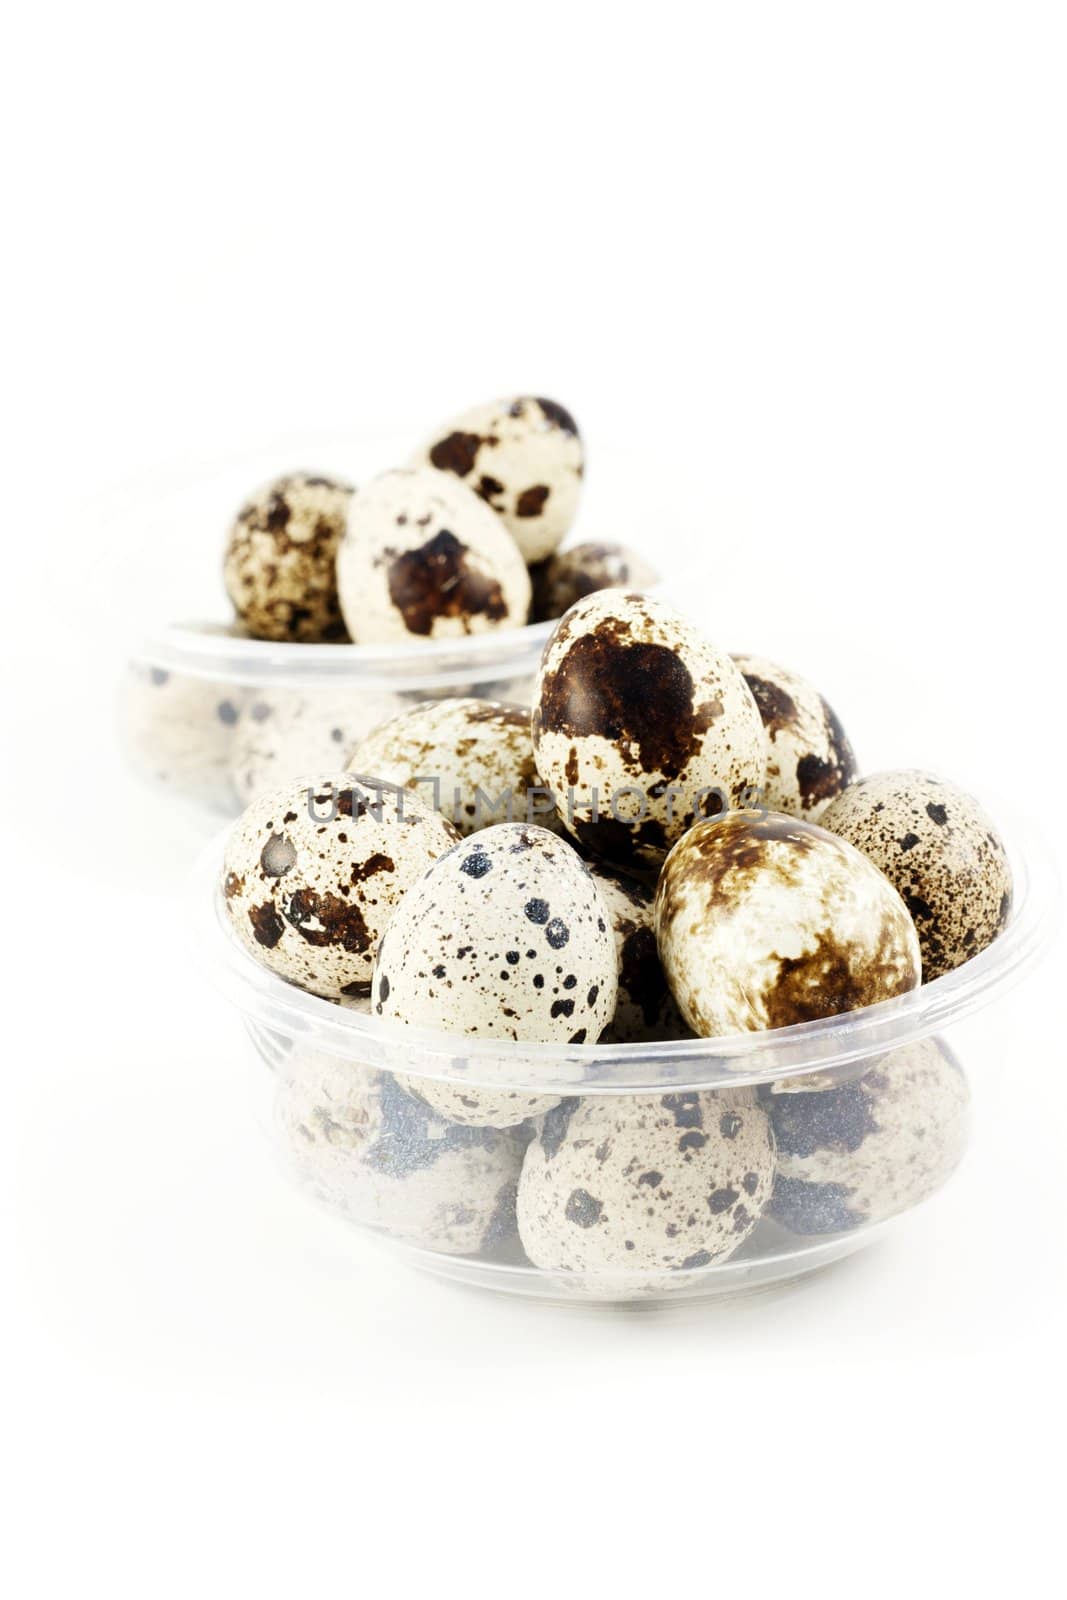 Quail eggs by magraphics